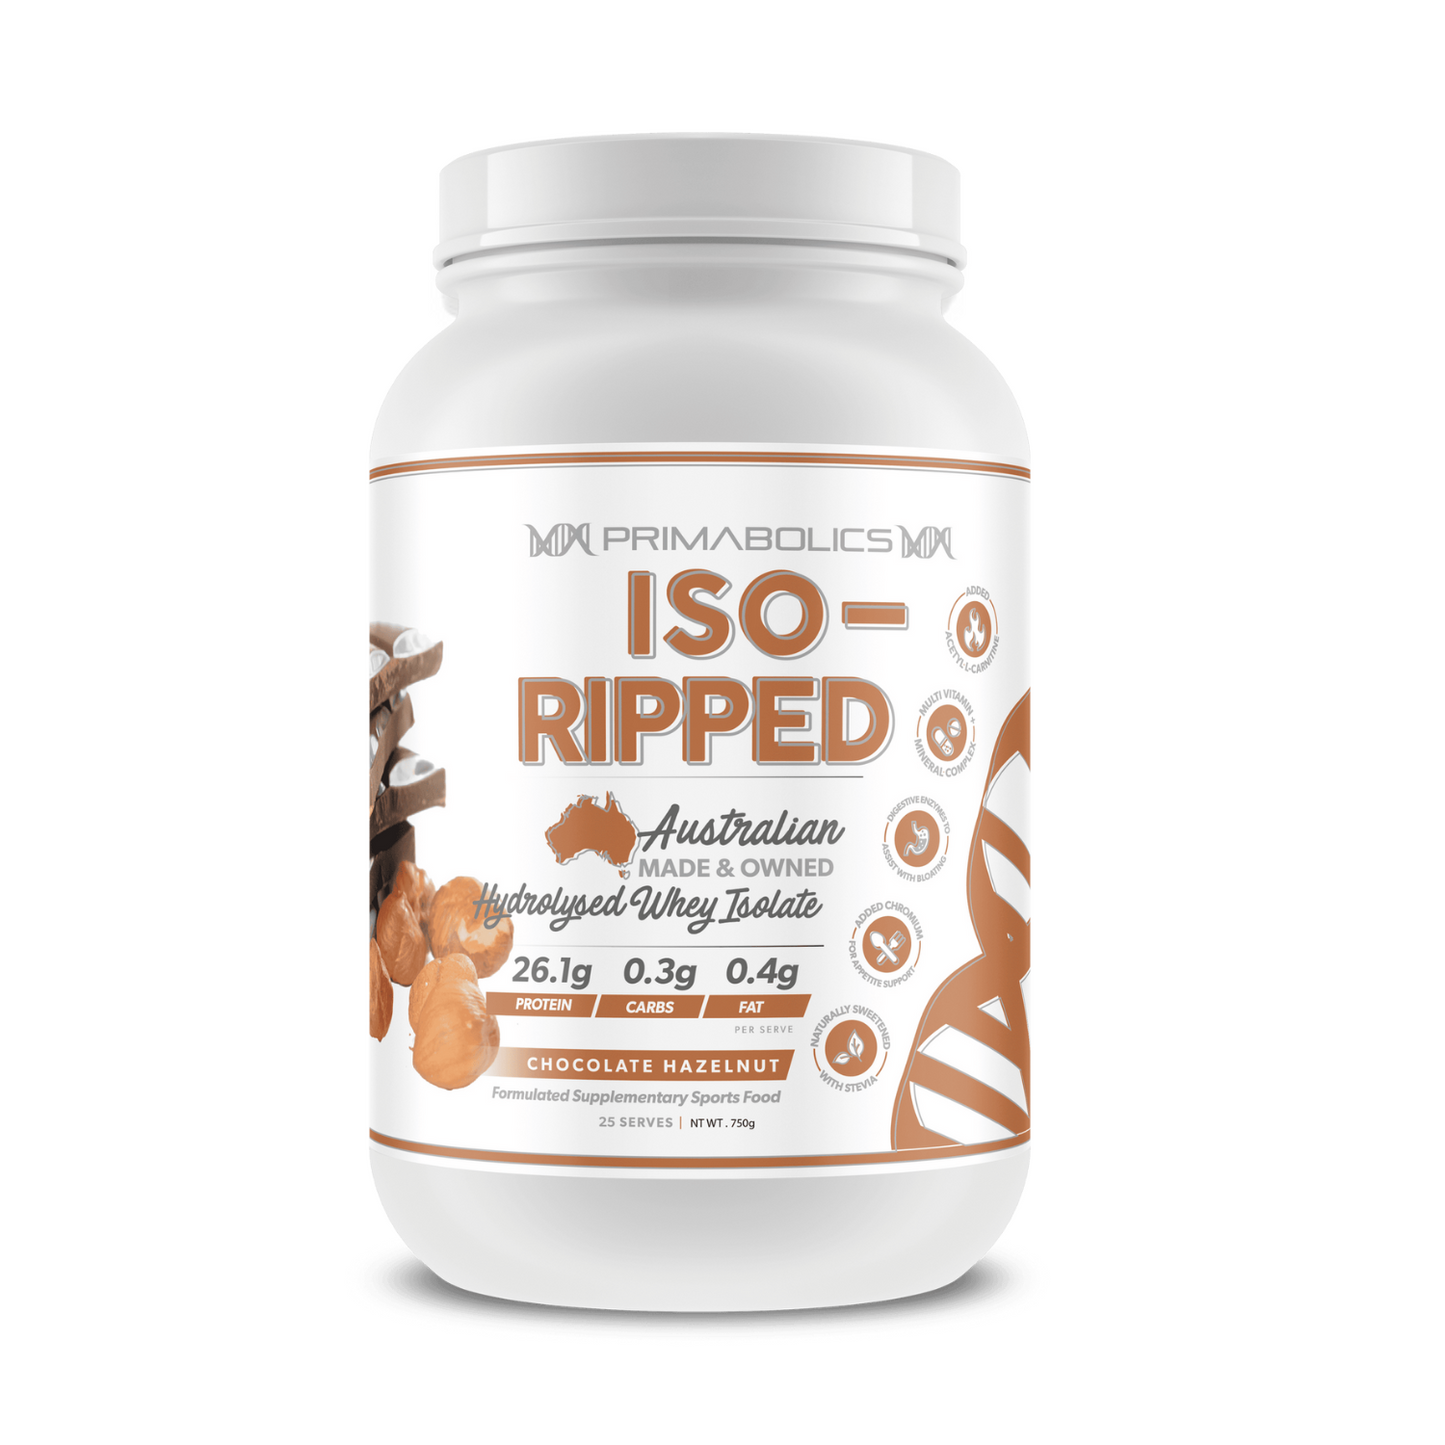 Iso-ripped